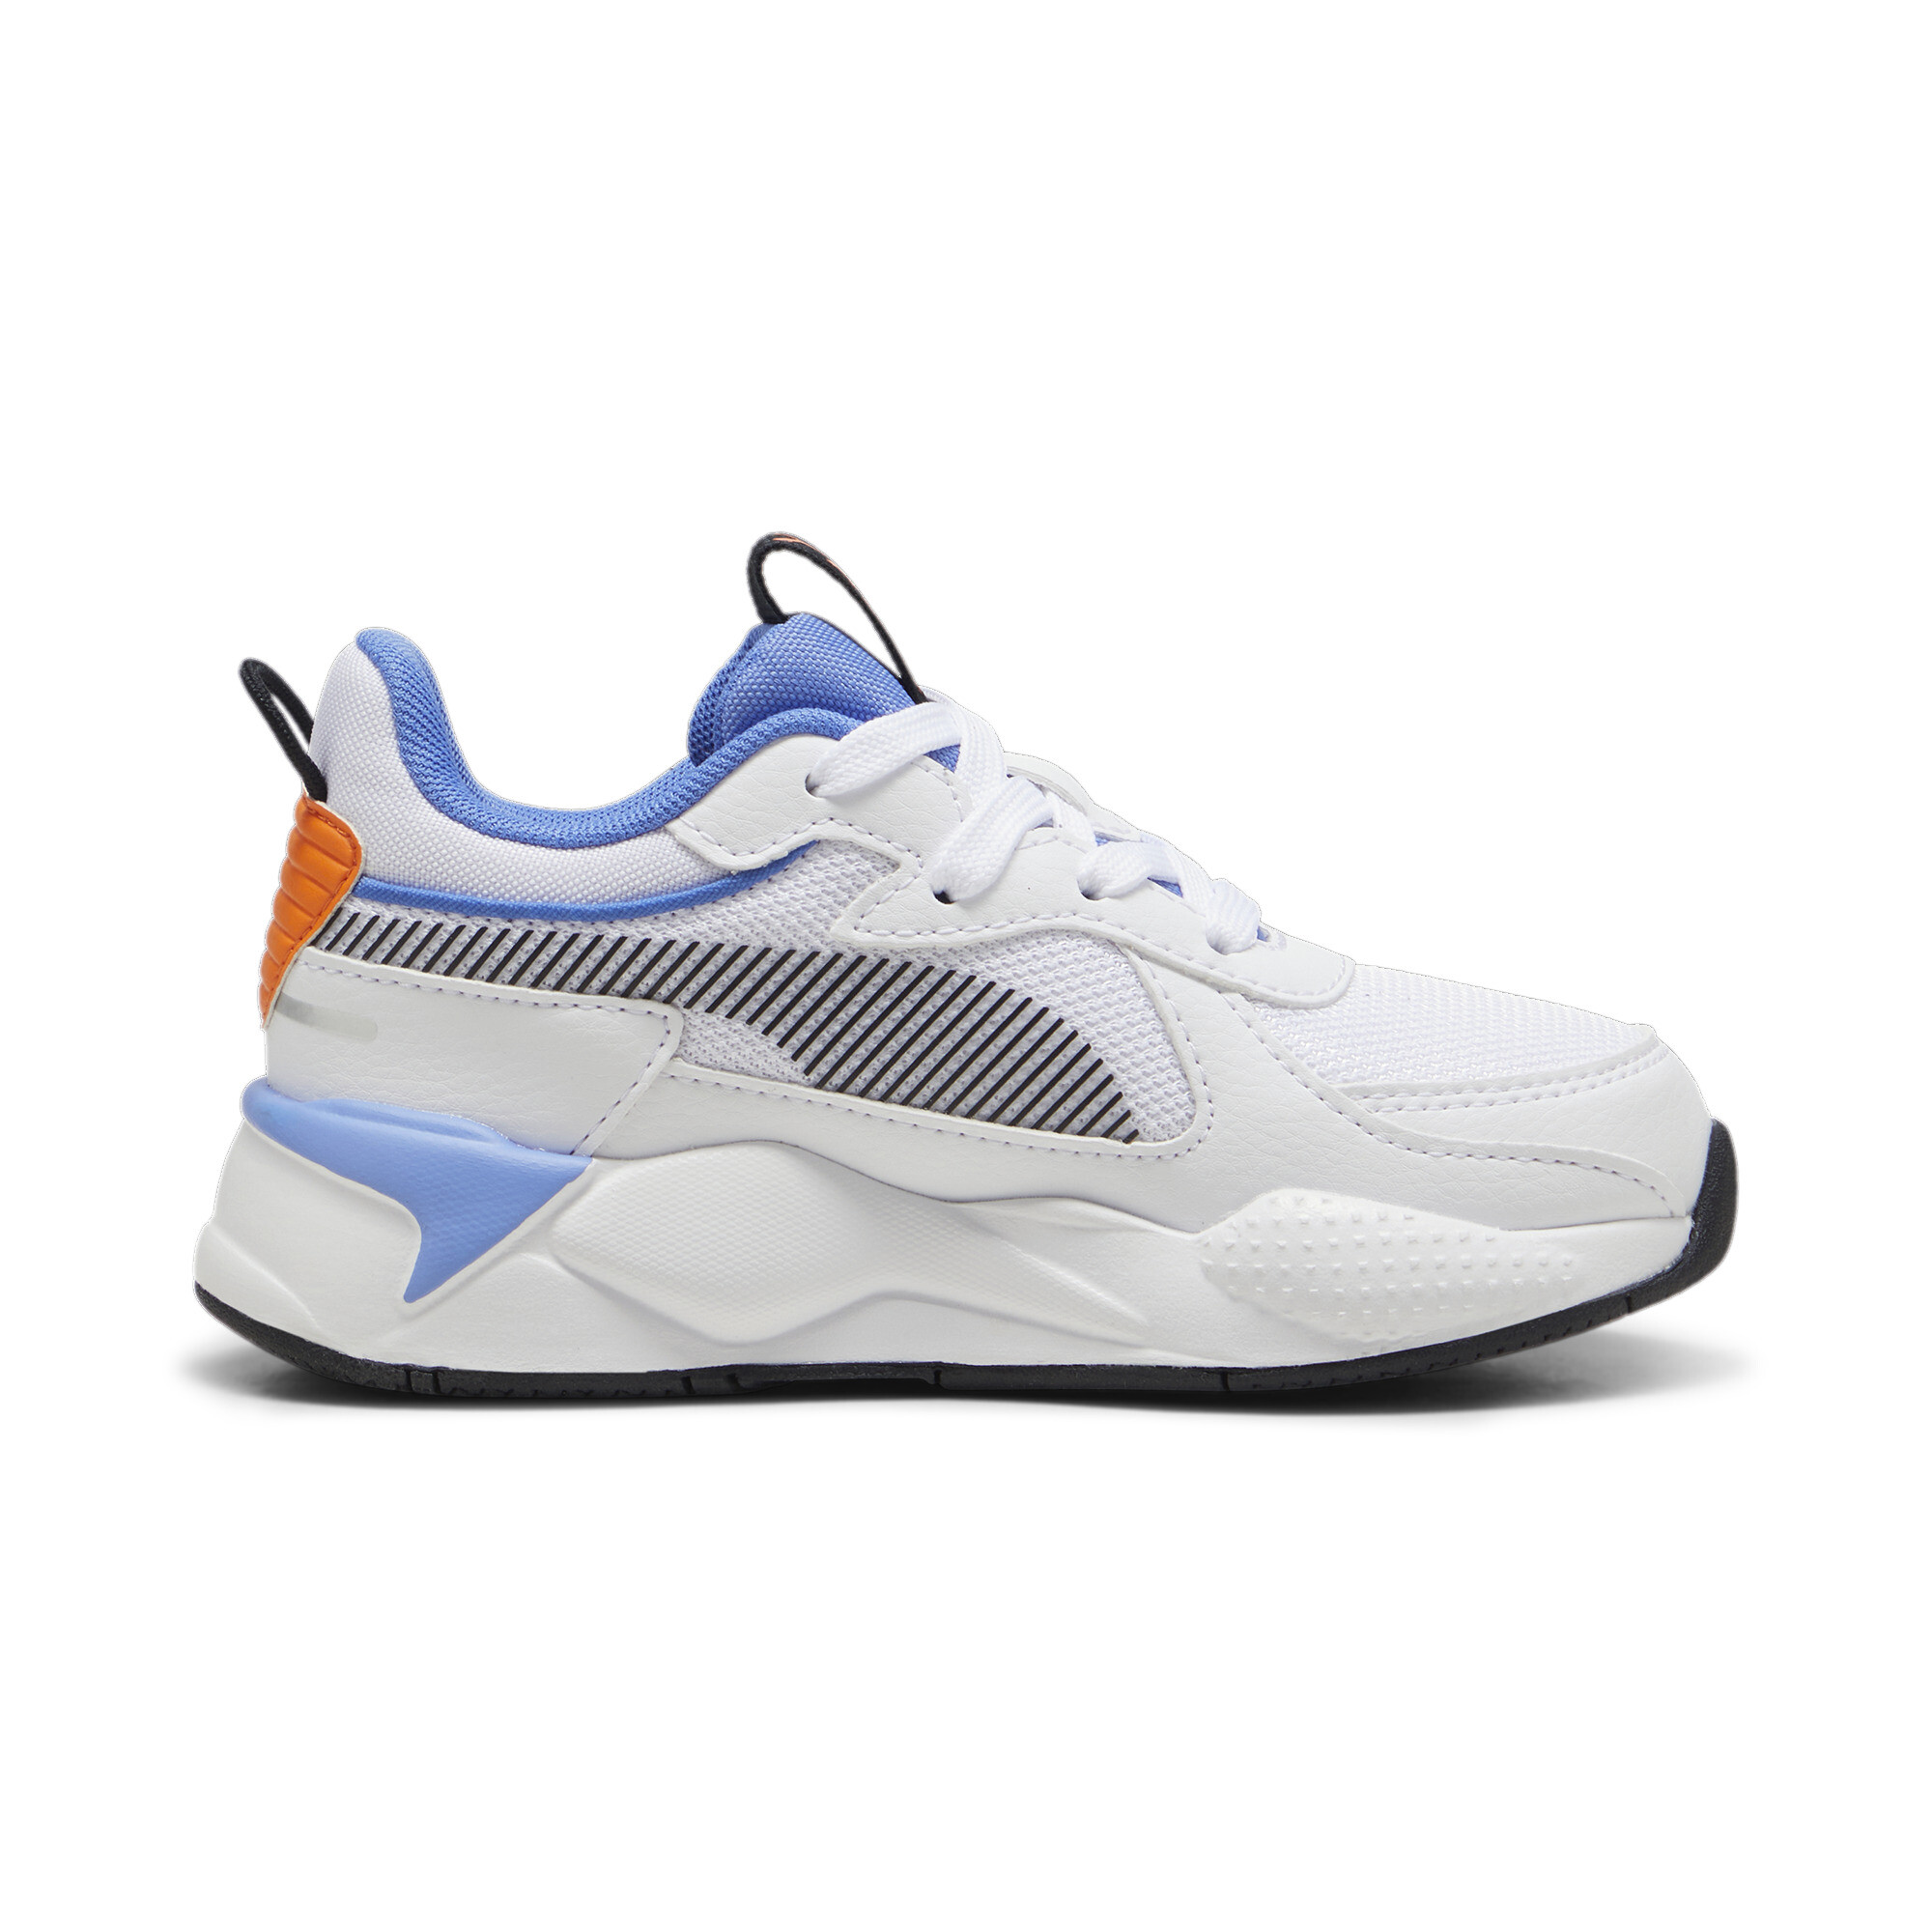 Puma RS-X Kids' Sneakers, White, Size 27.5, Shoes